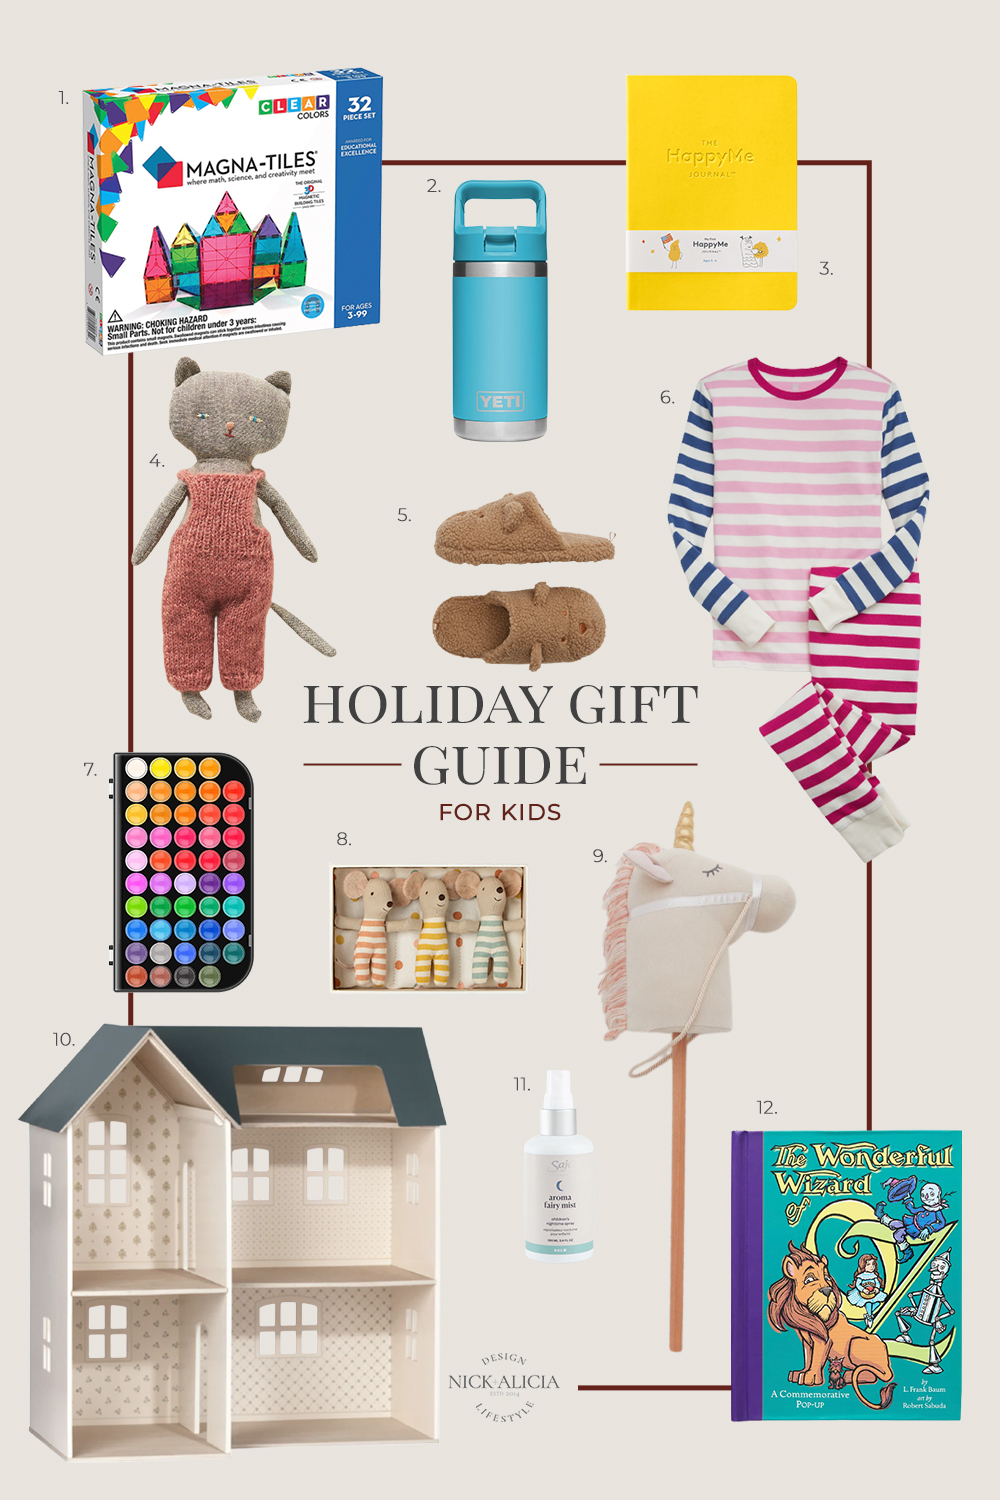 The 10 Best Gifts for Woodworkers - A Gift Guide - Dream Design DIY